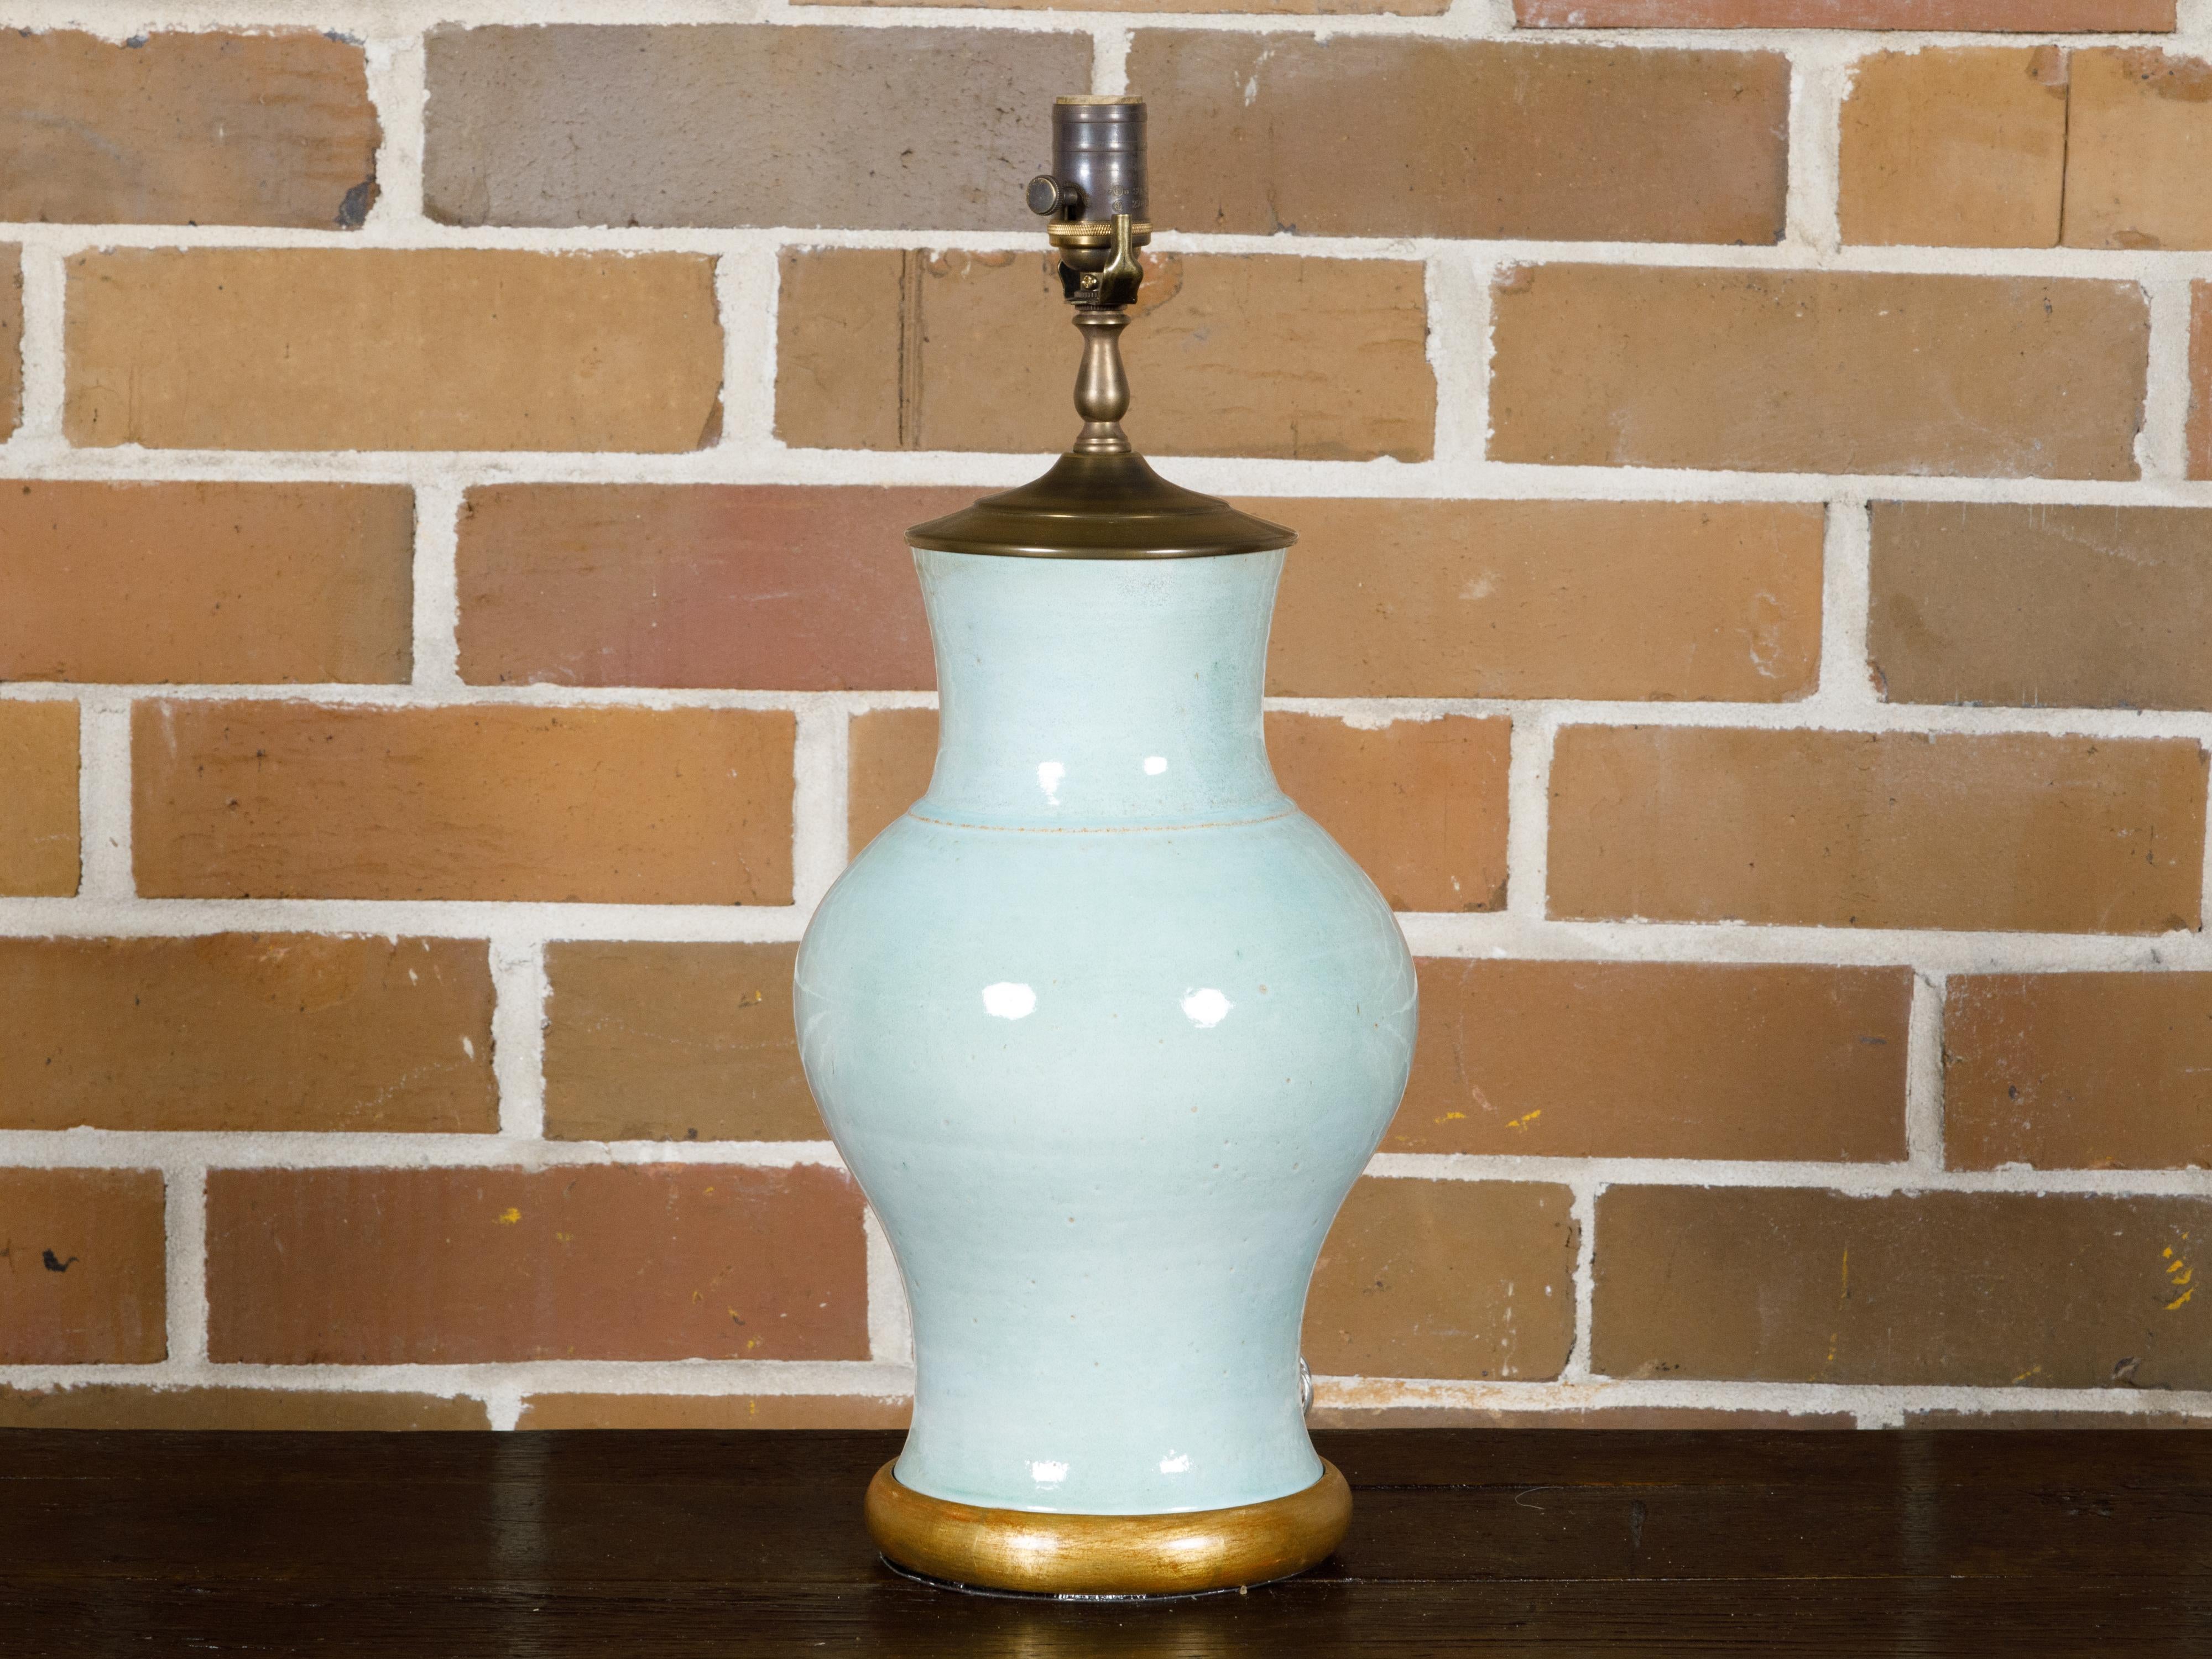 A Turn of the Century celadon table lamp from circa 1900 with gilded wood circular base. This exquisite Turn of the Century table lamp, dating back to circa 1900, is a beautiful testament to timeless design. The lamp's body is crafted in a soft